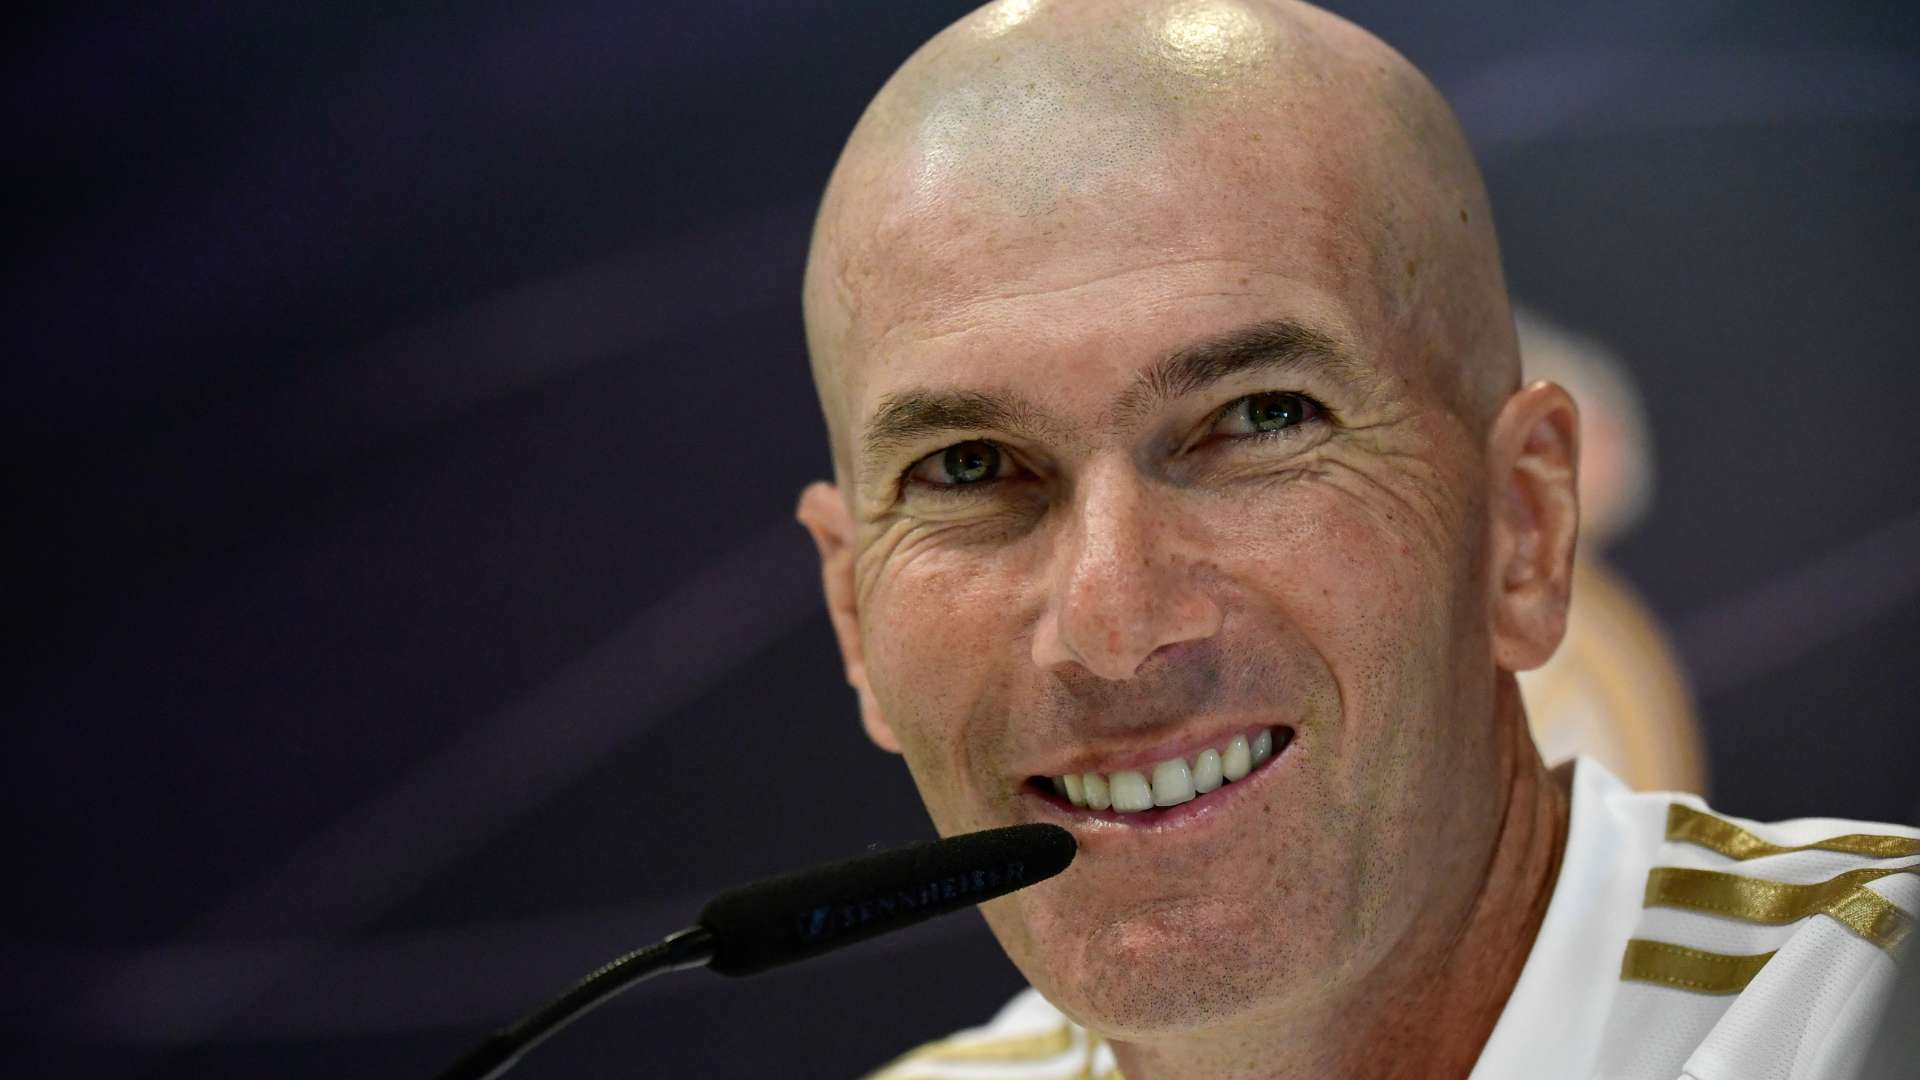 Zinedine Zidane, Real Madrid coach, during a press conference in 2019-20 season